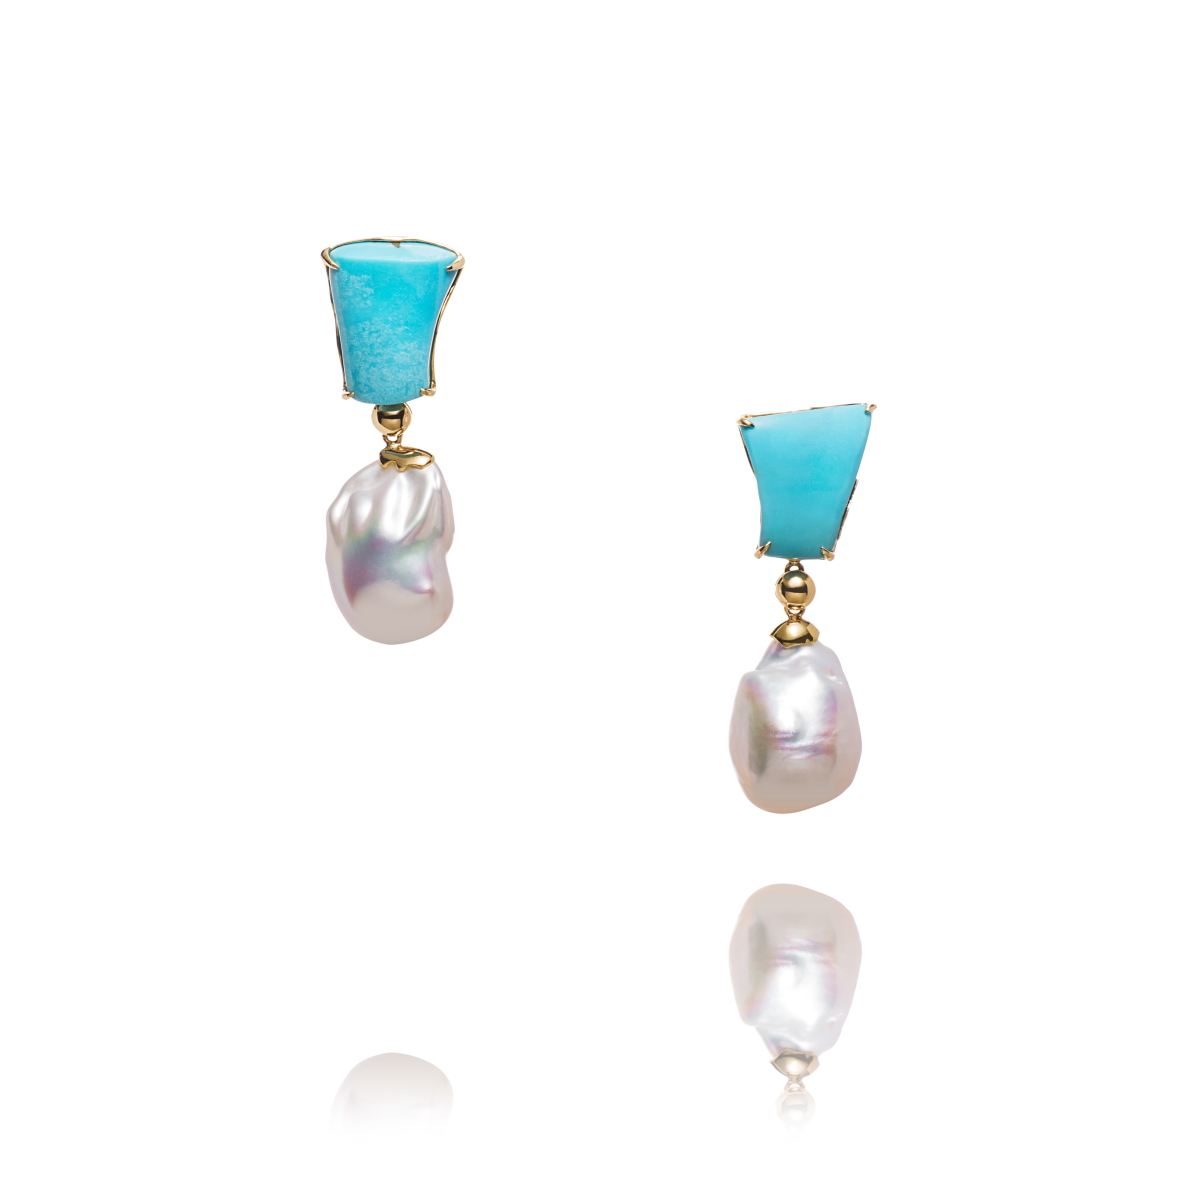 Sleeping Beauty turquoise from  Arizona, USA and baroque pearls set in 18kts gold. pearl (2).JPG